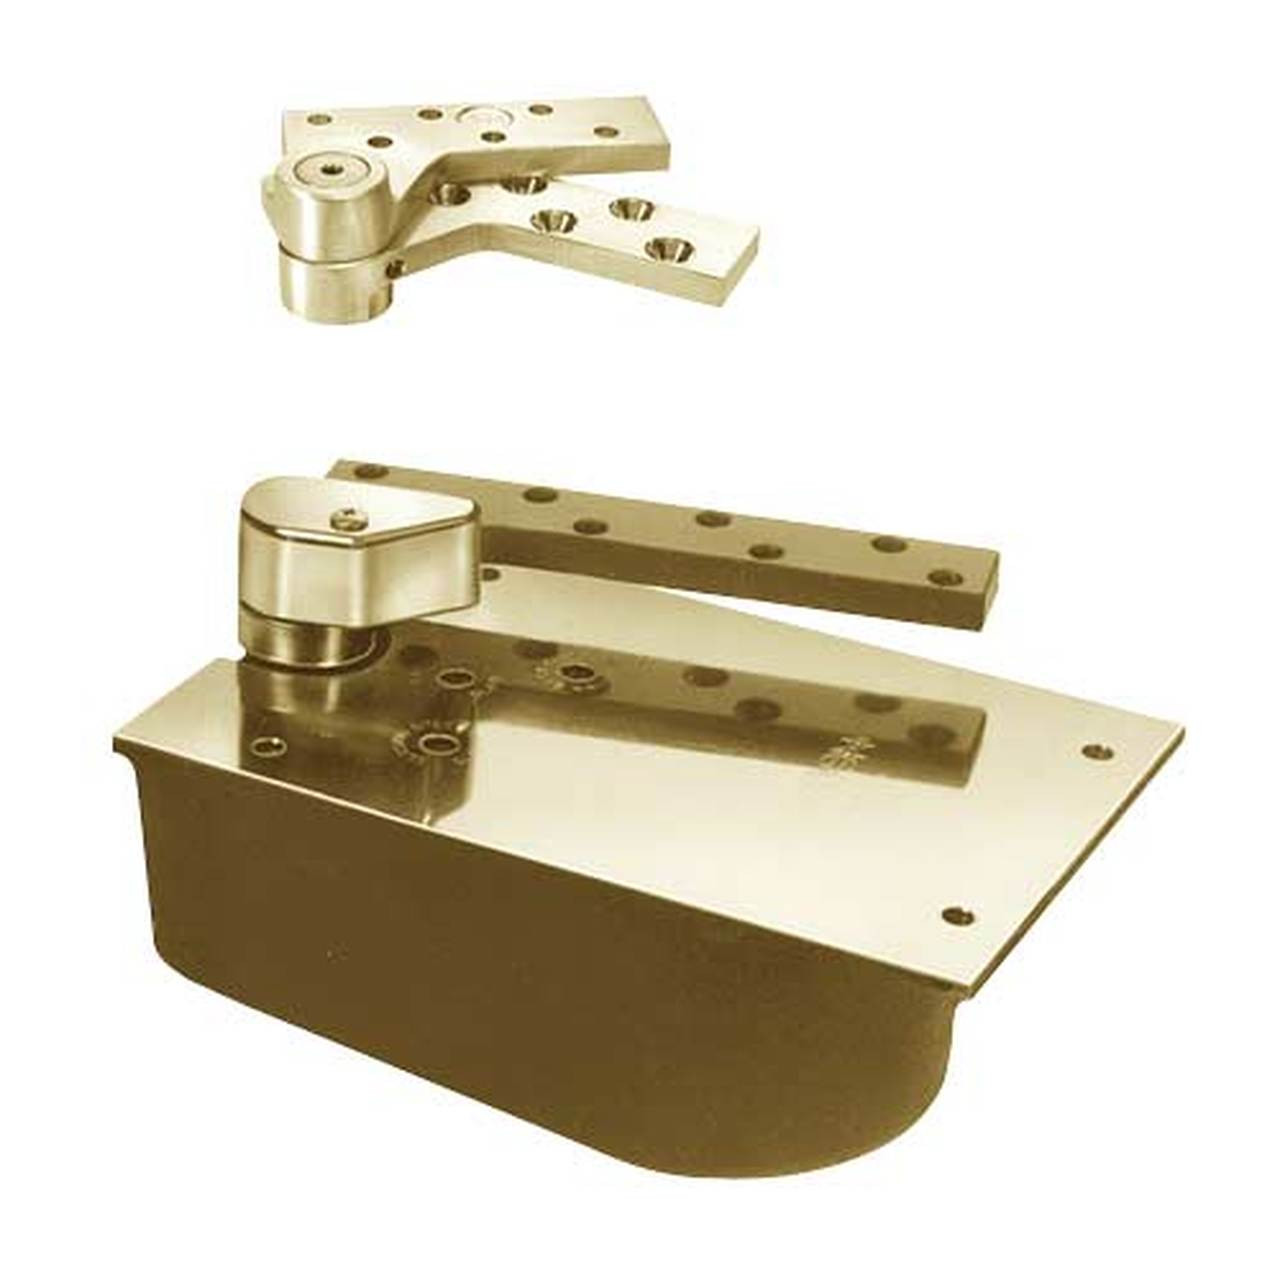 L27-105S-LFP-LCC-RH-2-1/4-606 Rixson 27 Series Extra Heavy Duty Lead Lined Offset Floor Closer in Satin Brass Finish